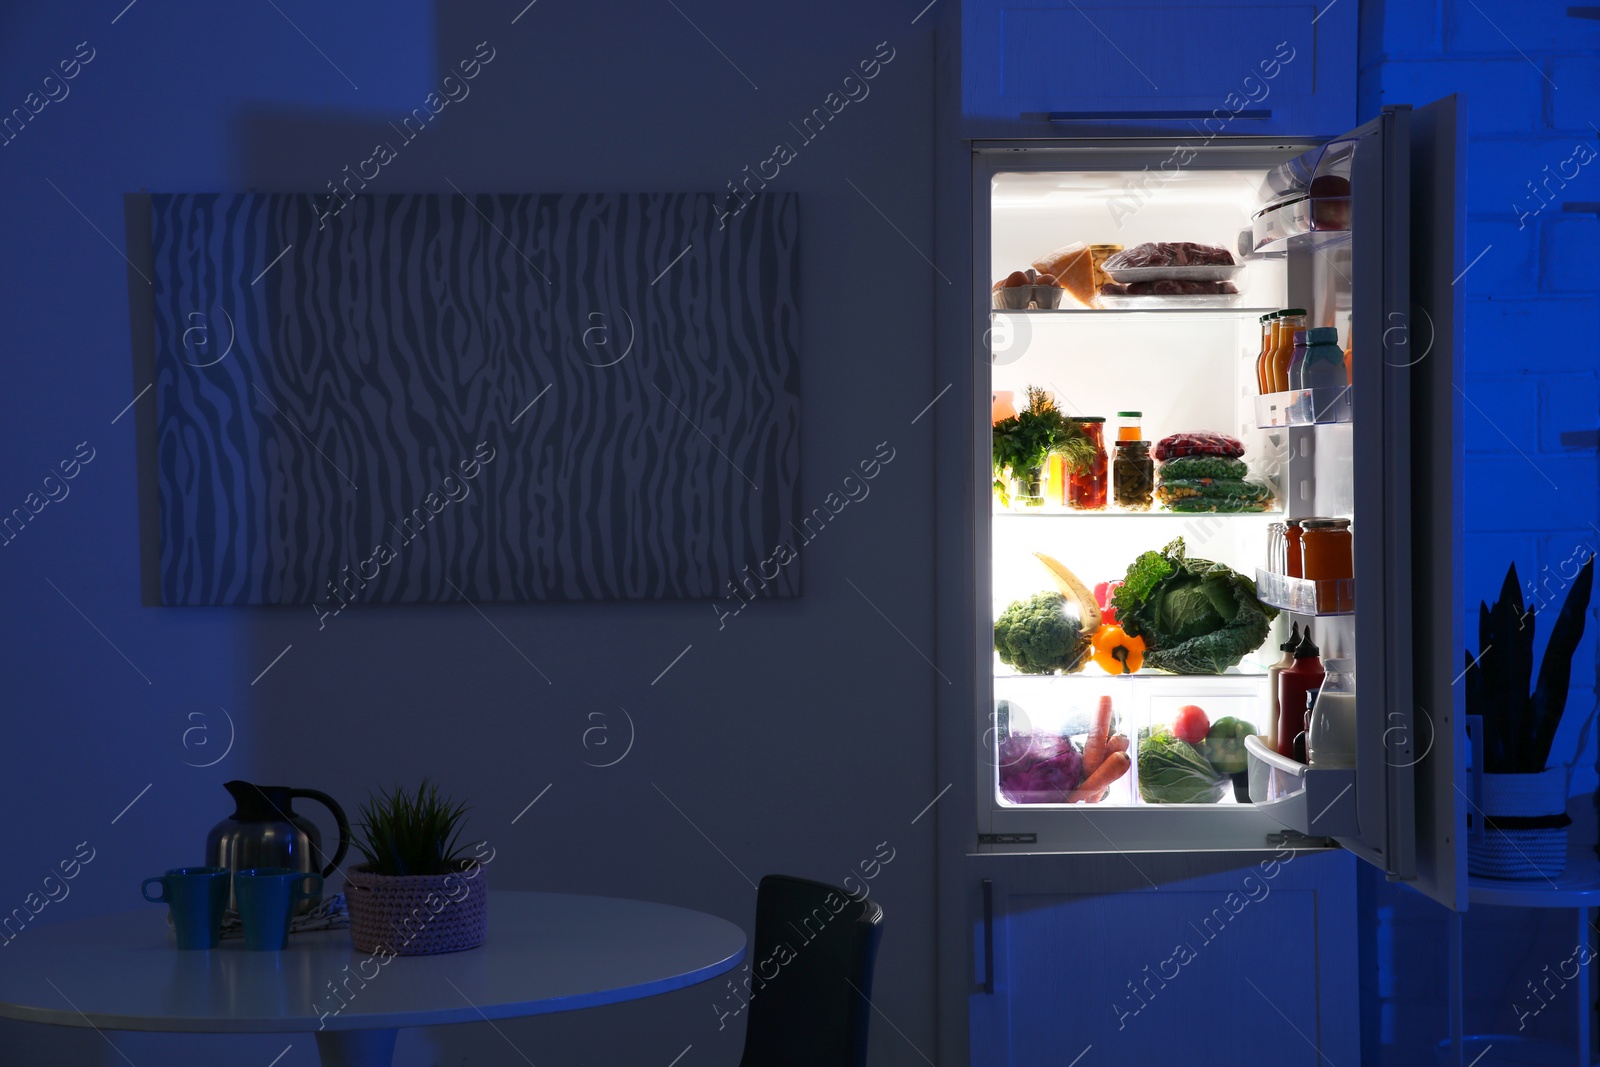 Photo of Stylish kitchen interior with refrigerator full of products at night